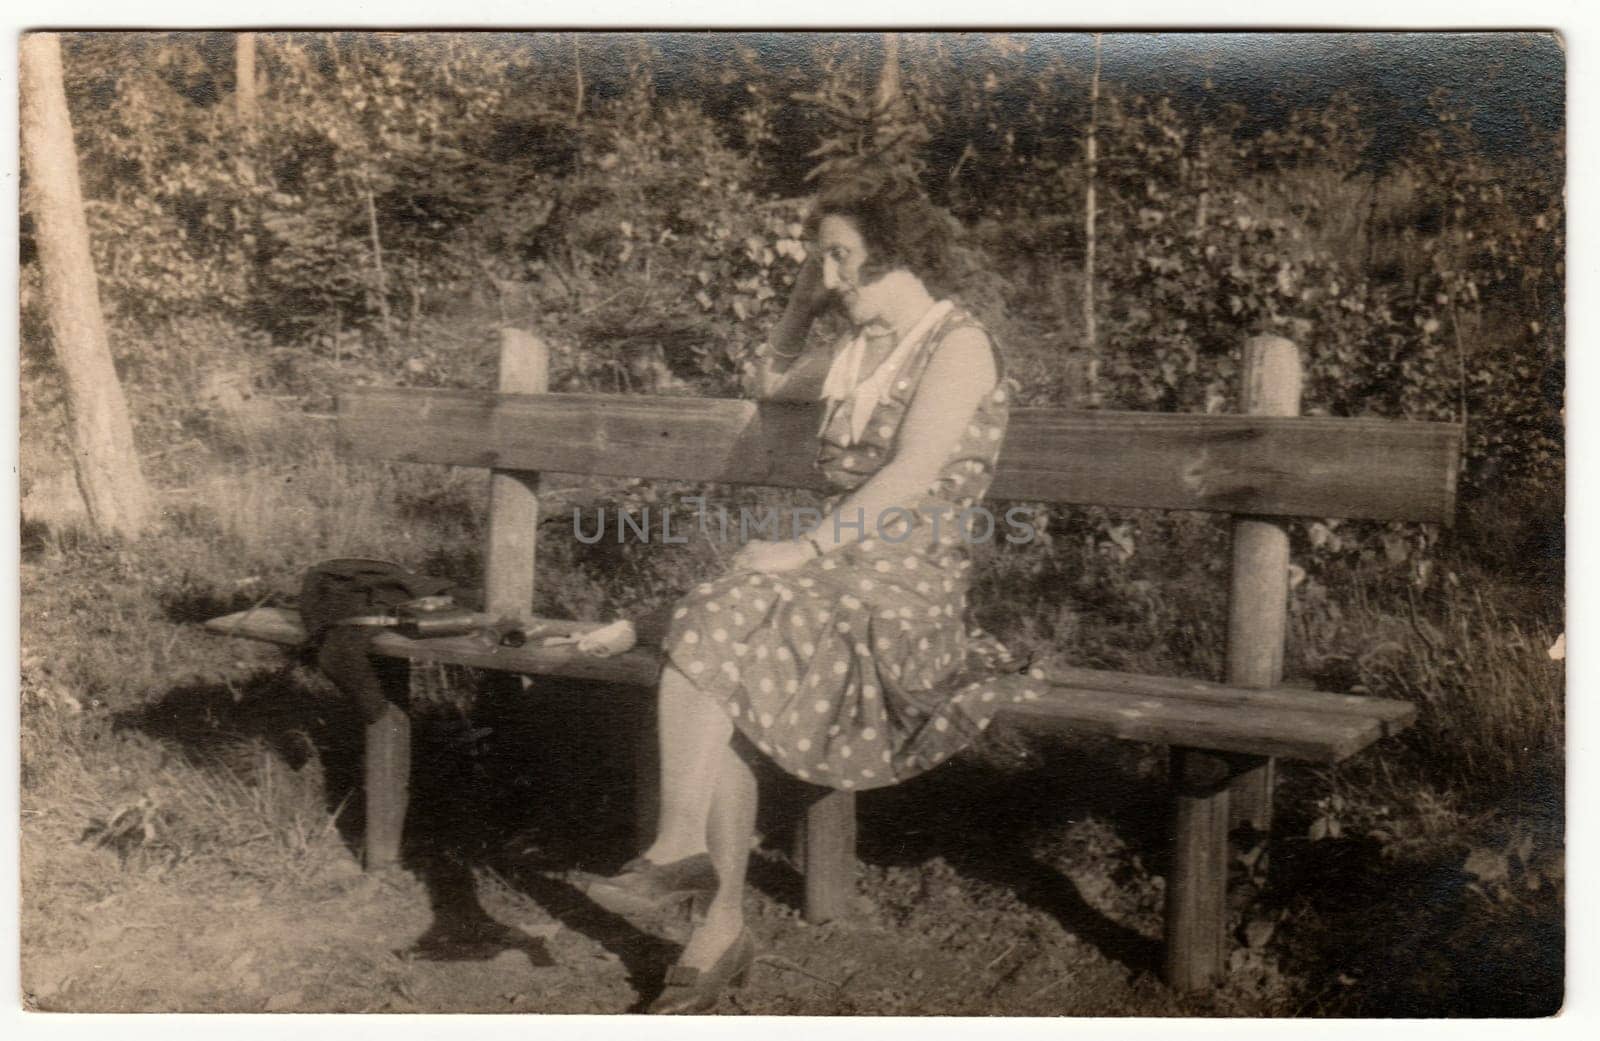 THE CZECHOSLOVAK REPUBLIC - JUNE 26, 1931: Vintage photo shows woman sits on the wooden bench in the park. Retro black and white photography. Circa 1930s.